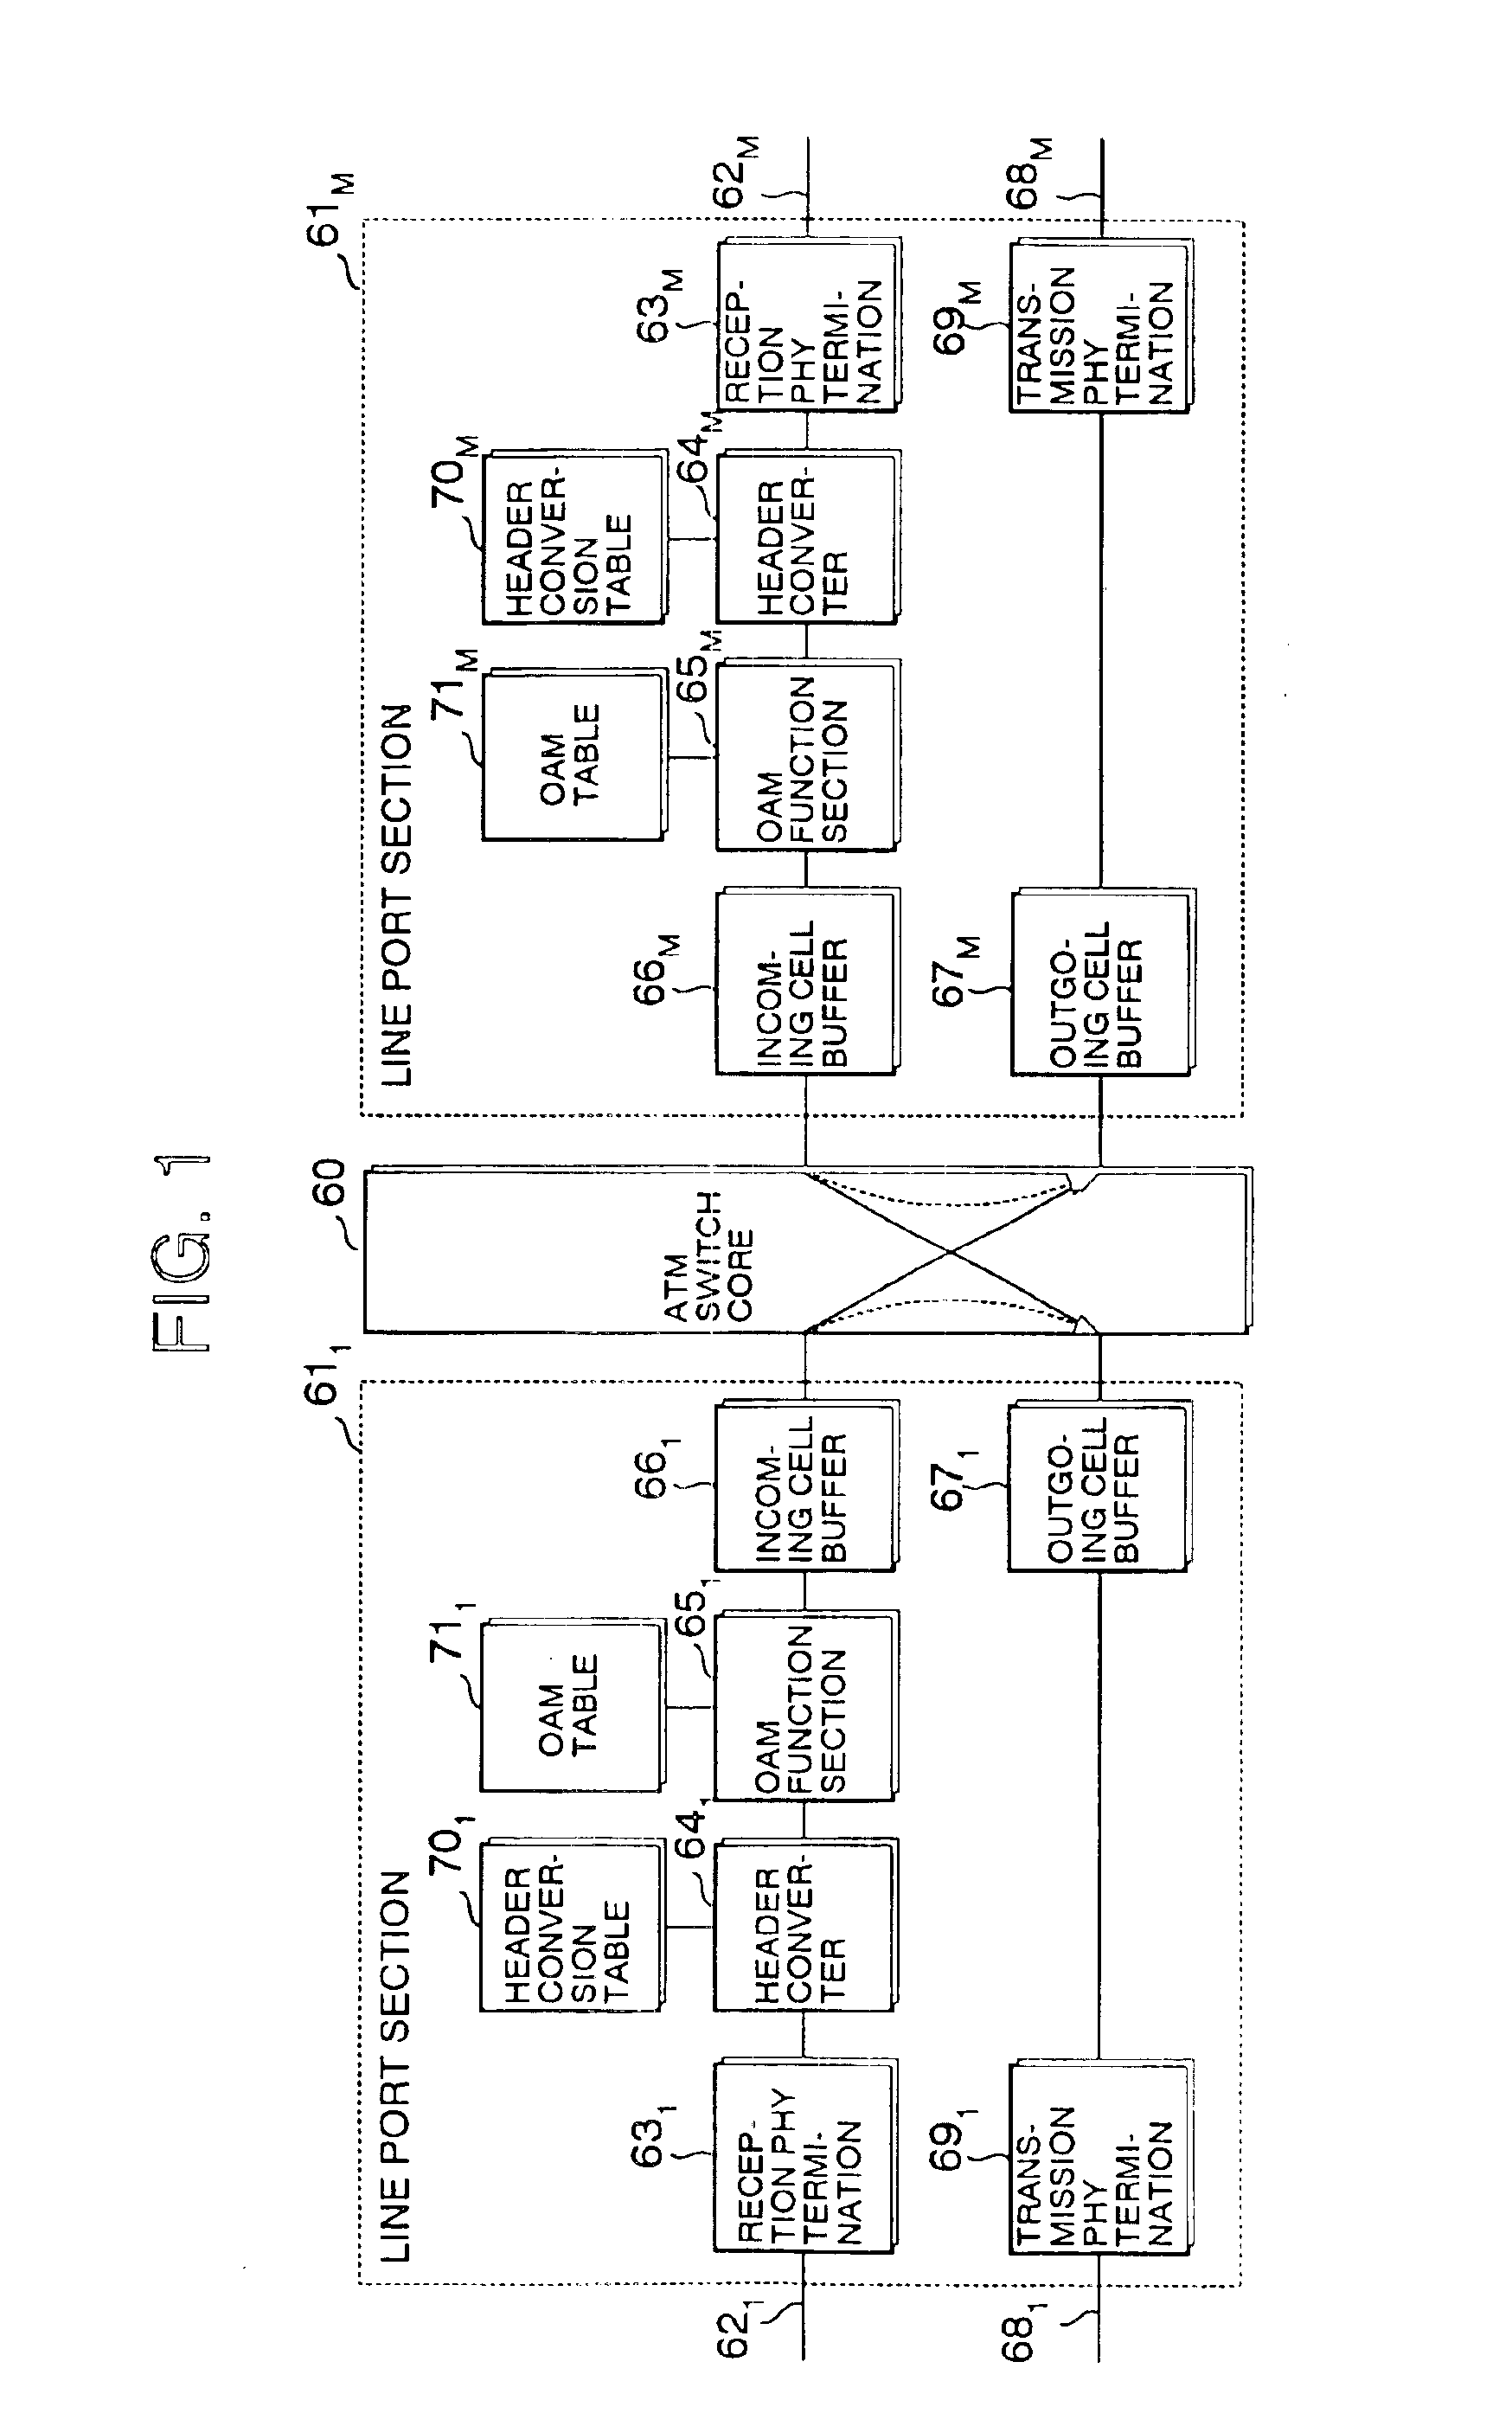 ATM switch with OAM functions